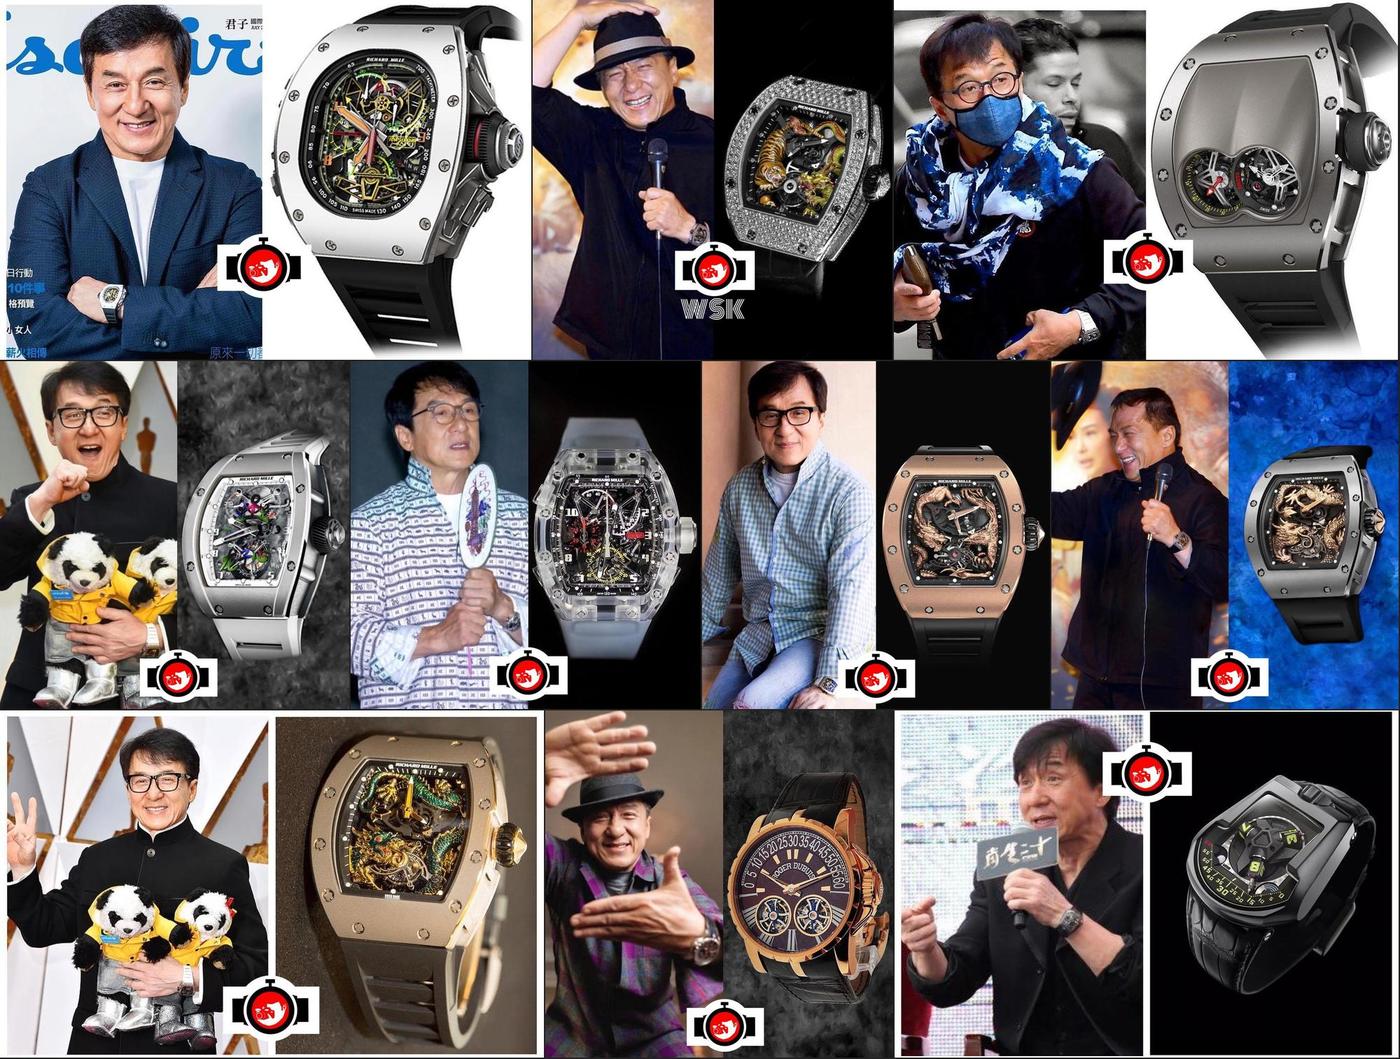 Exploring Jackie Chan's Stunning Watch Collection - Richard Mille, Roger Dubuis, and Urwerk